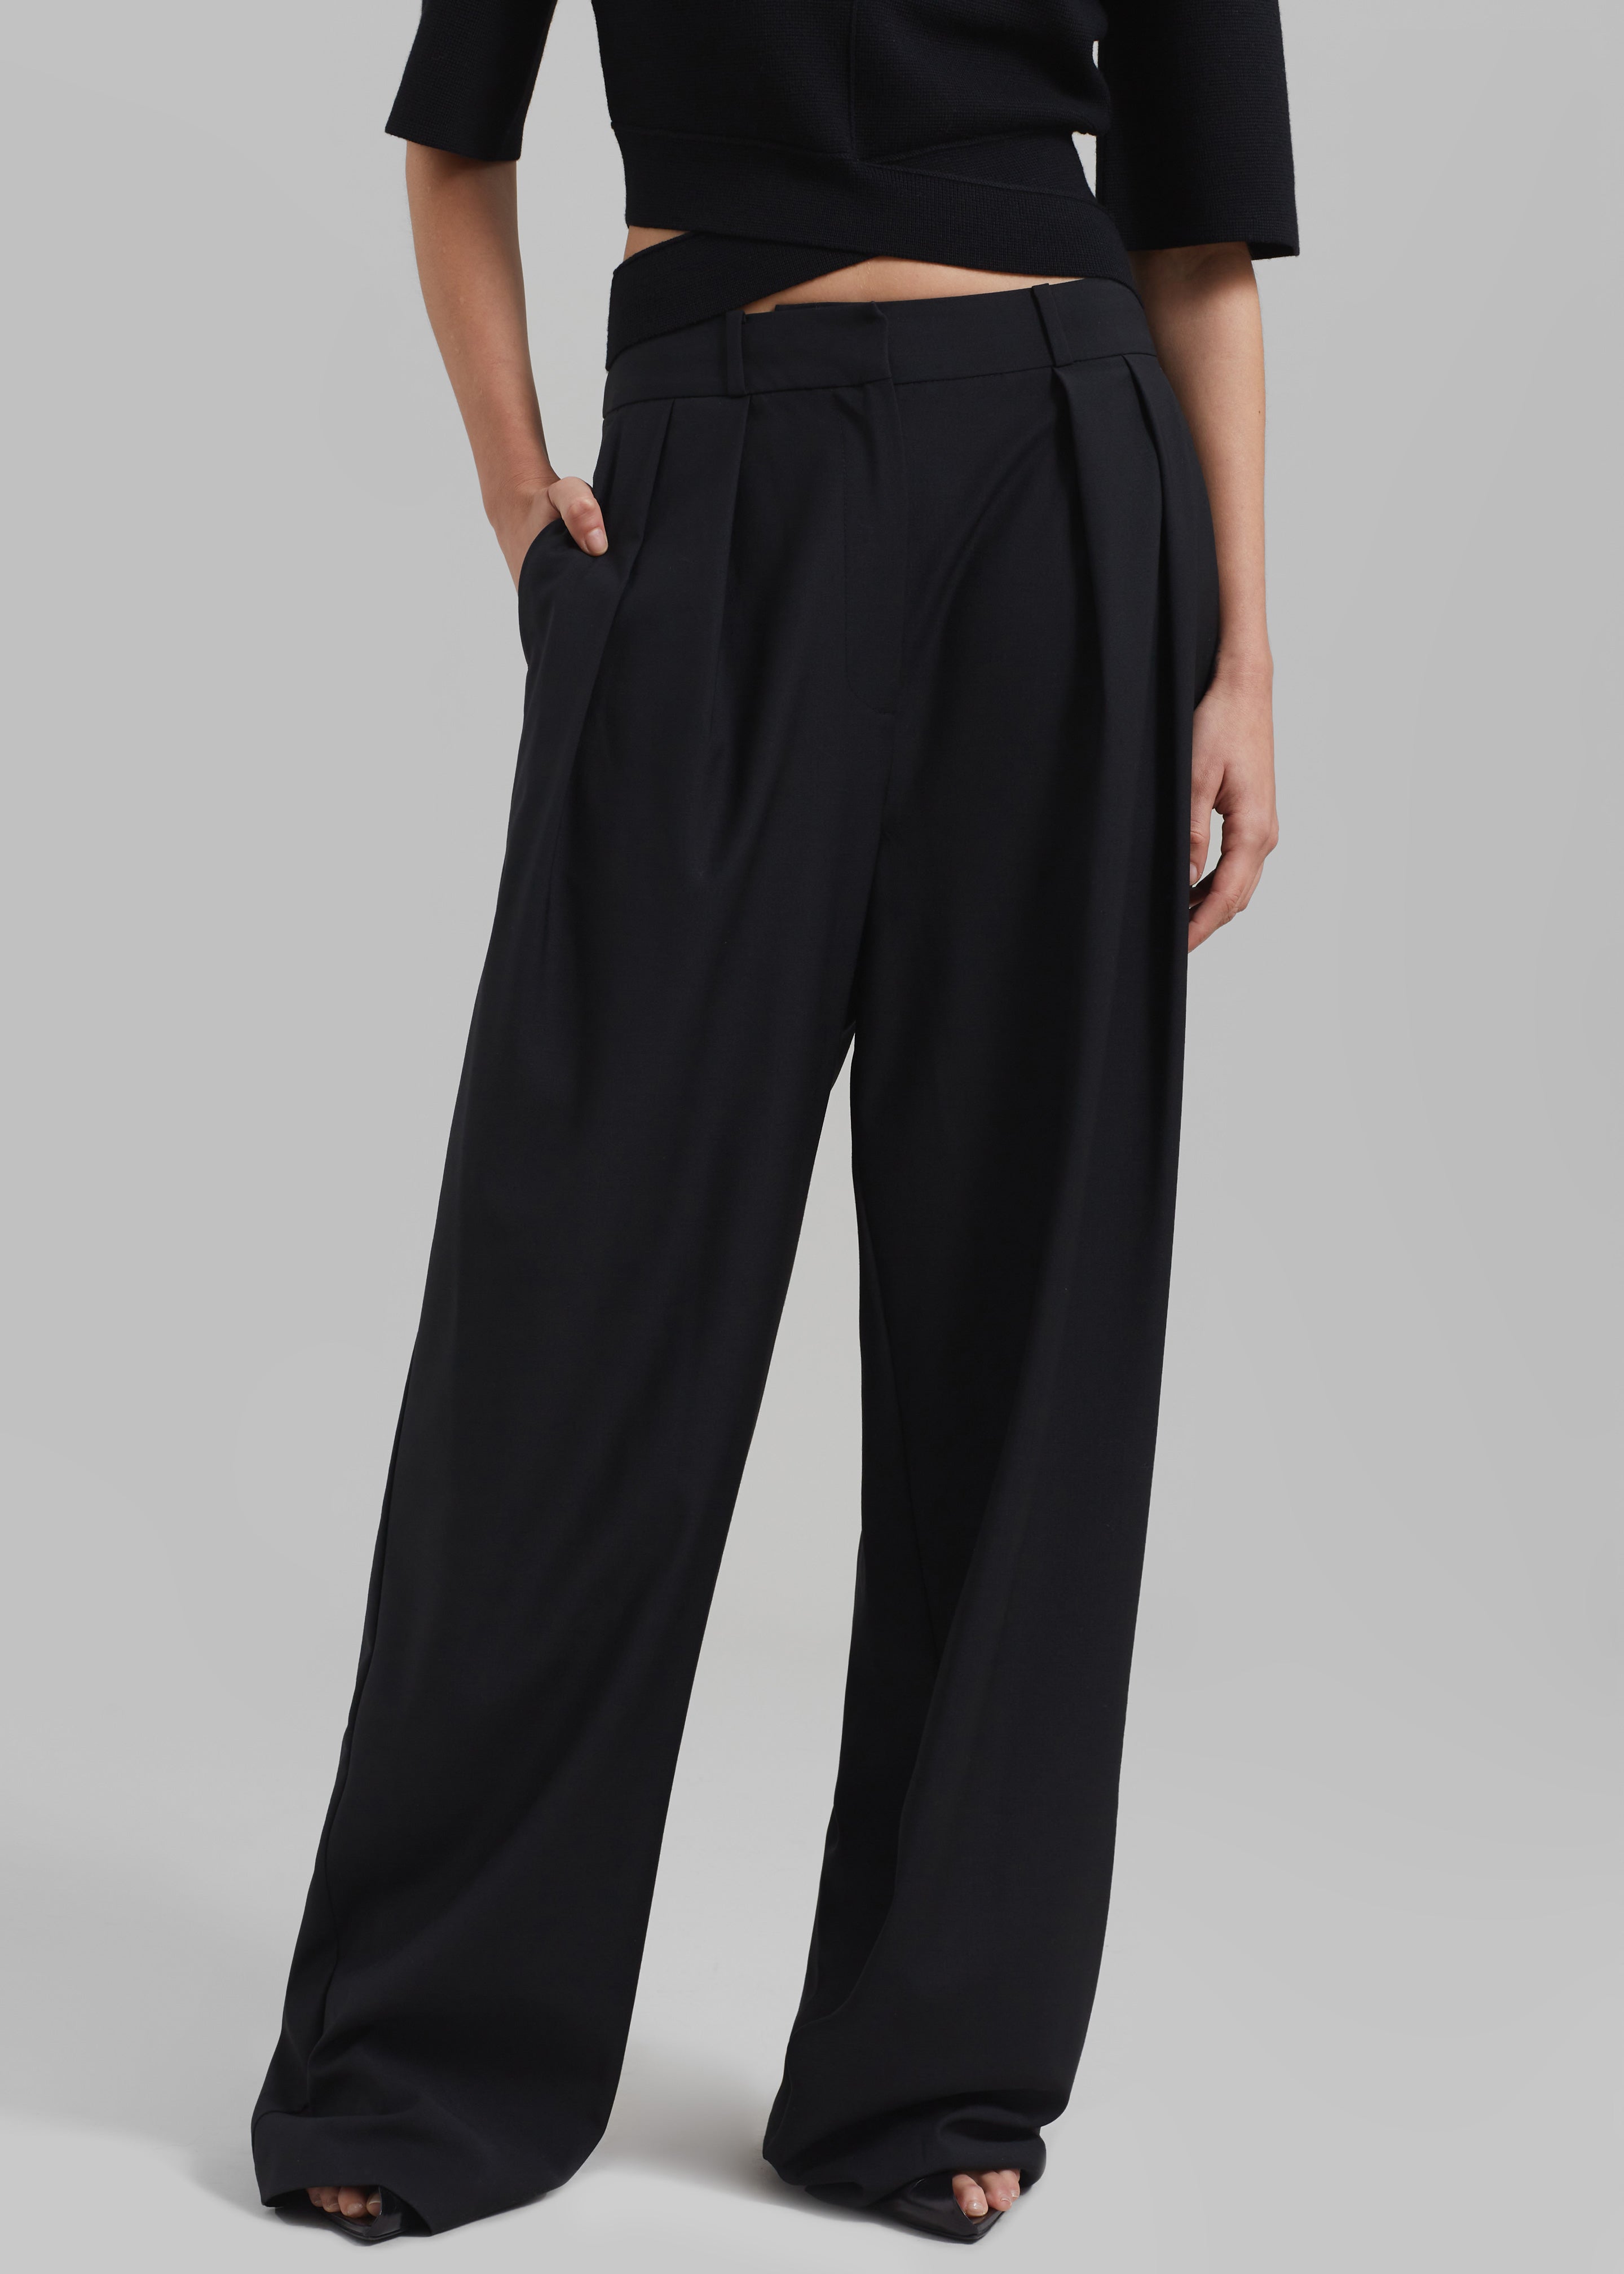 Ripley Pleated Trousers - Black - 3